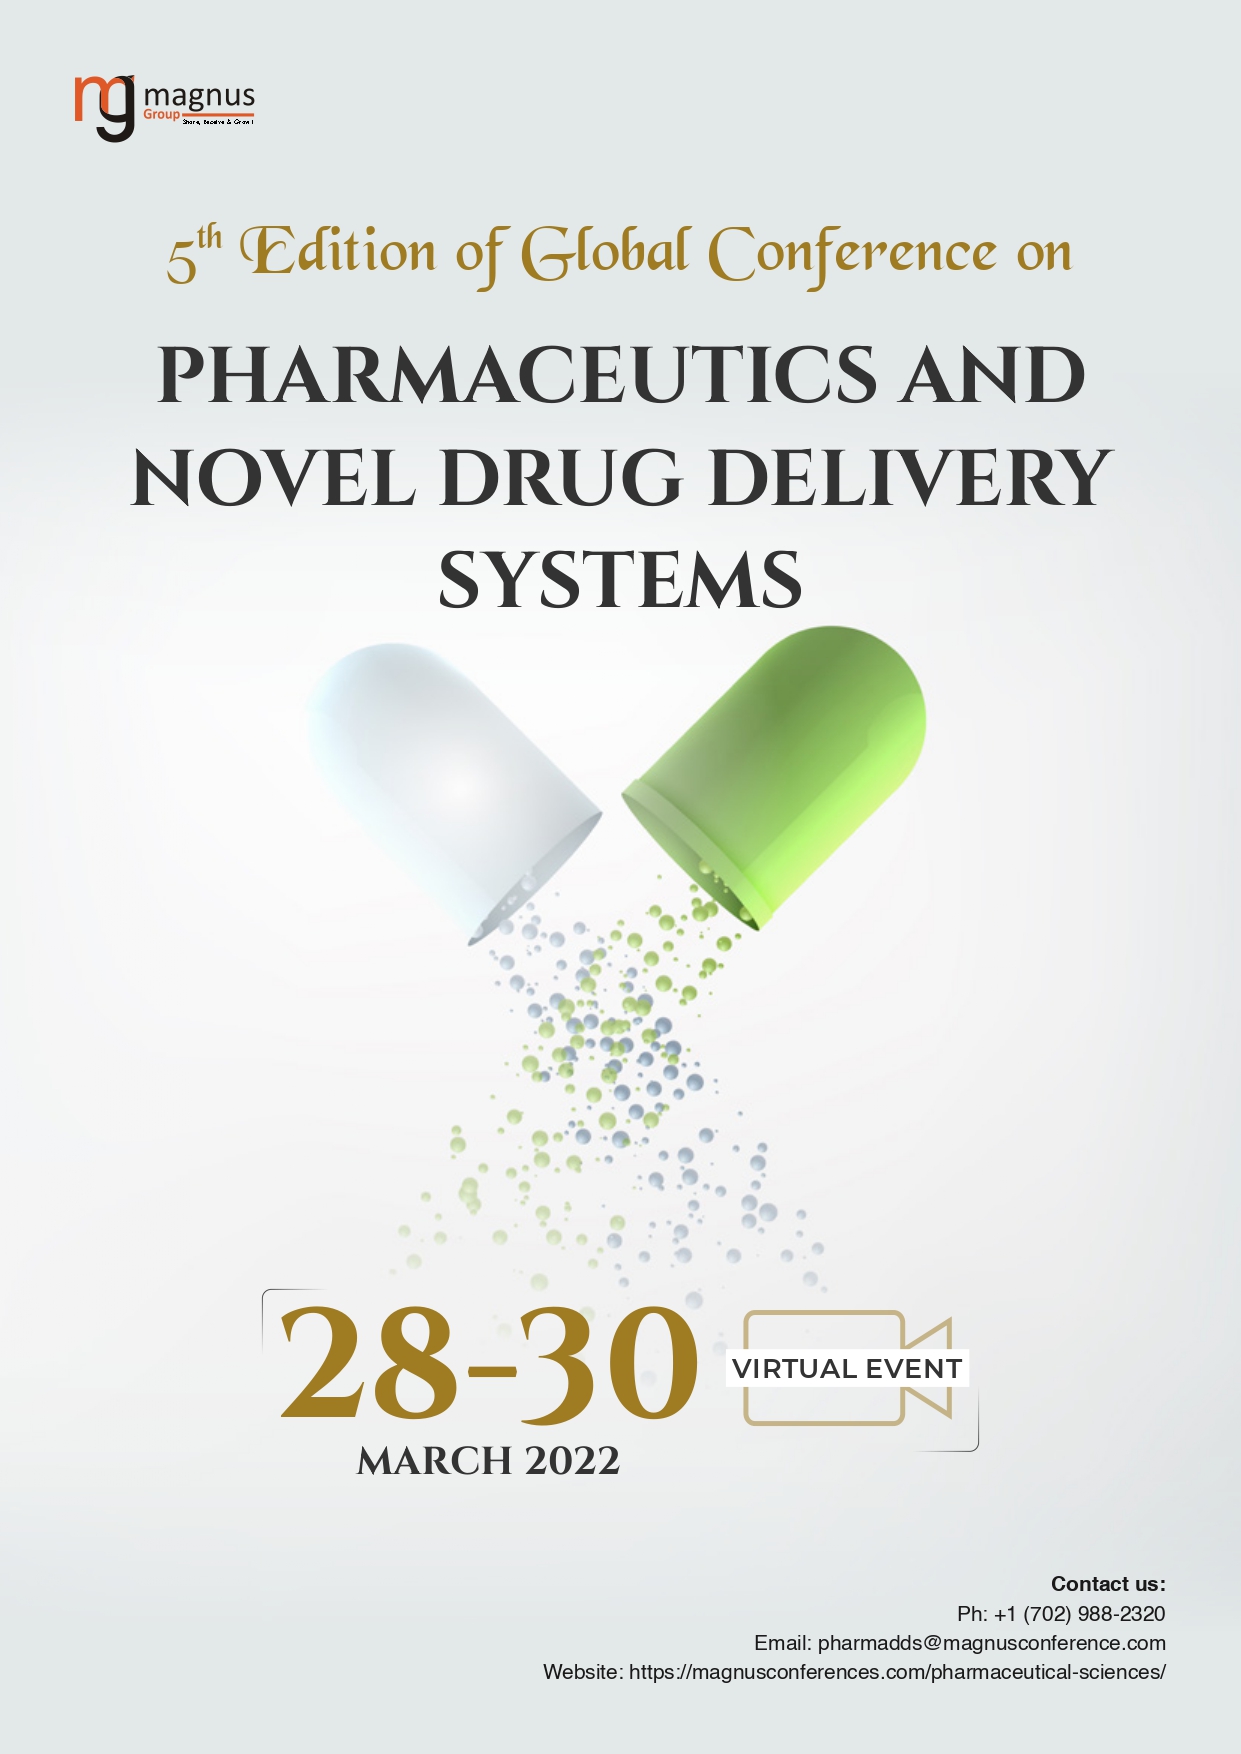 5th Edition of Global Conference on Pharmaceutics and Novel Drug Delivery Systems | Online Event Program